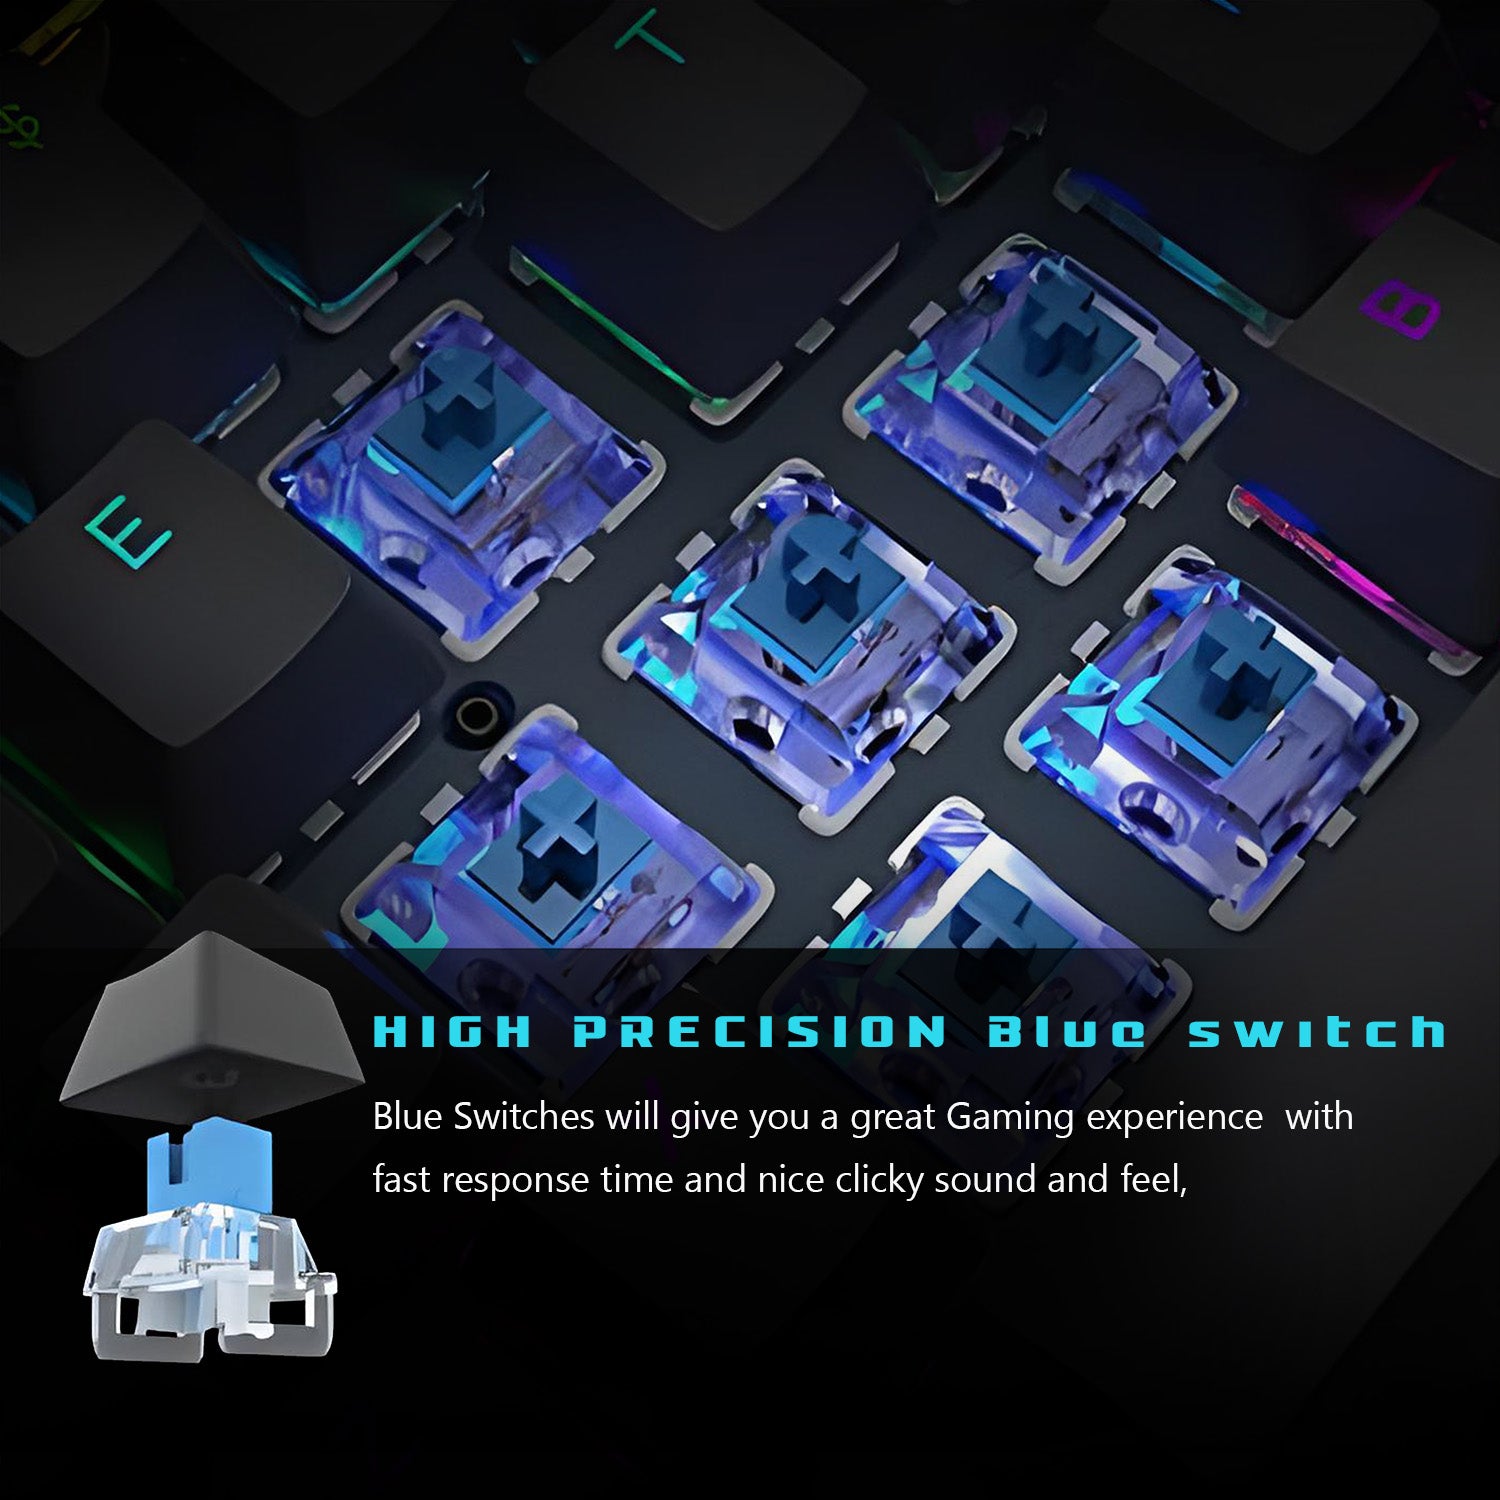 HAJAAN Wired Mechanical Gaming Keyboard and Mouse Combo RGB Backlit Gaming Keyboard with Anti-Ghosting 104 Keys and Blue Switch, RGB Gaming Mouse Up to 7200 DPI for Windows PC Gamers - (Black)